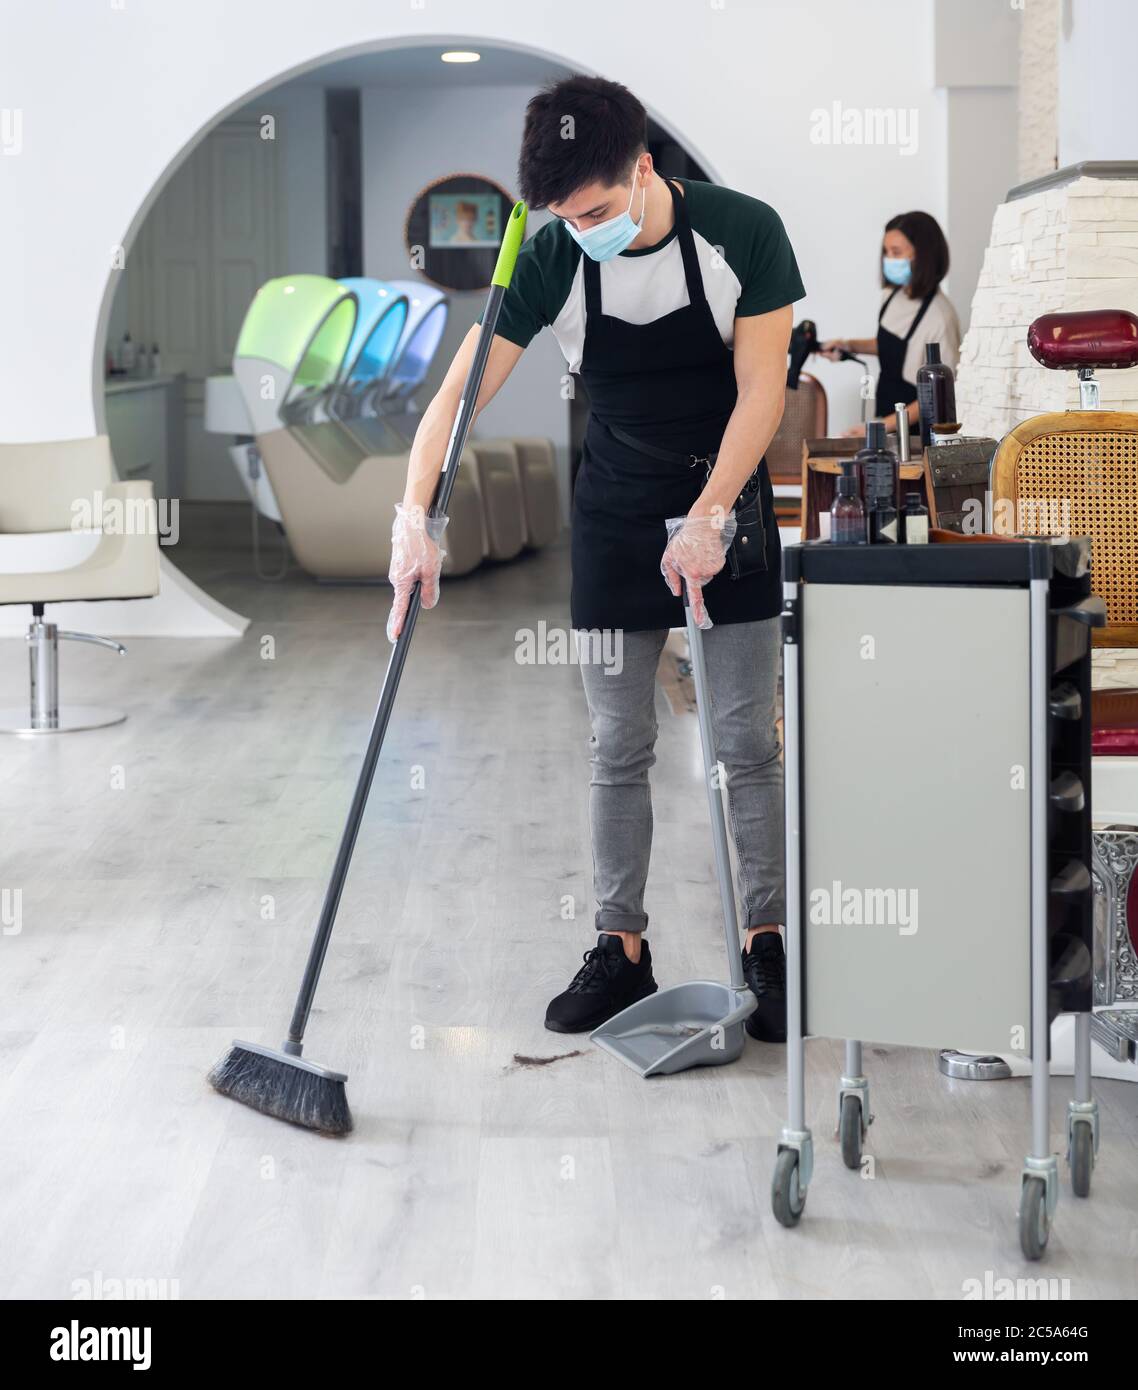 Working process in beauty studio during pandemic situation, man sweeping floor, female hairstyler making hairdo to client on background, all people we Stock Photo